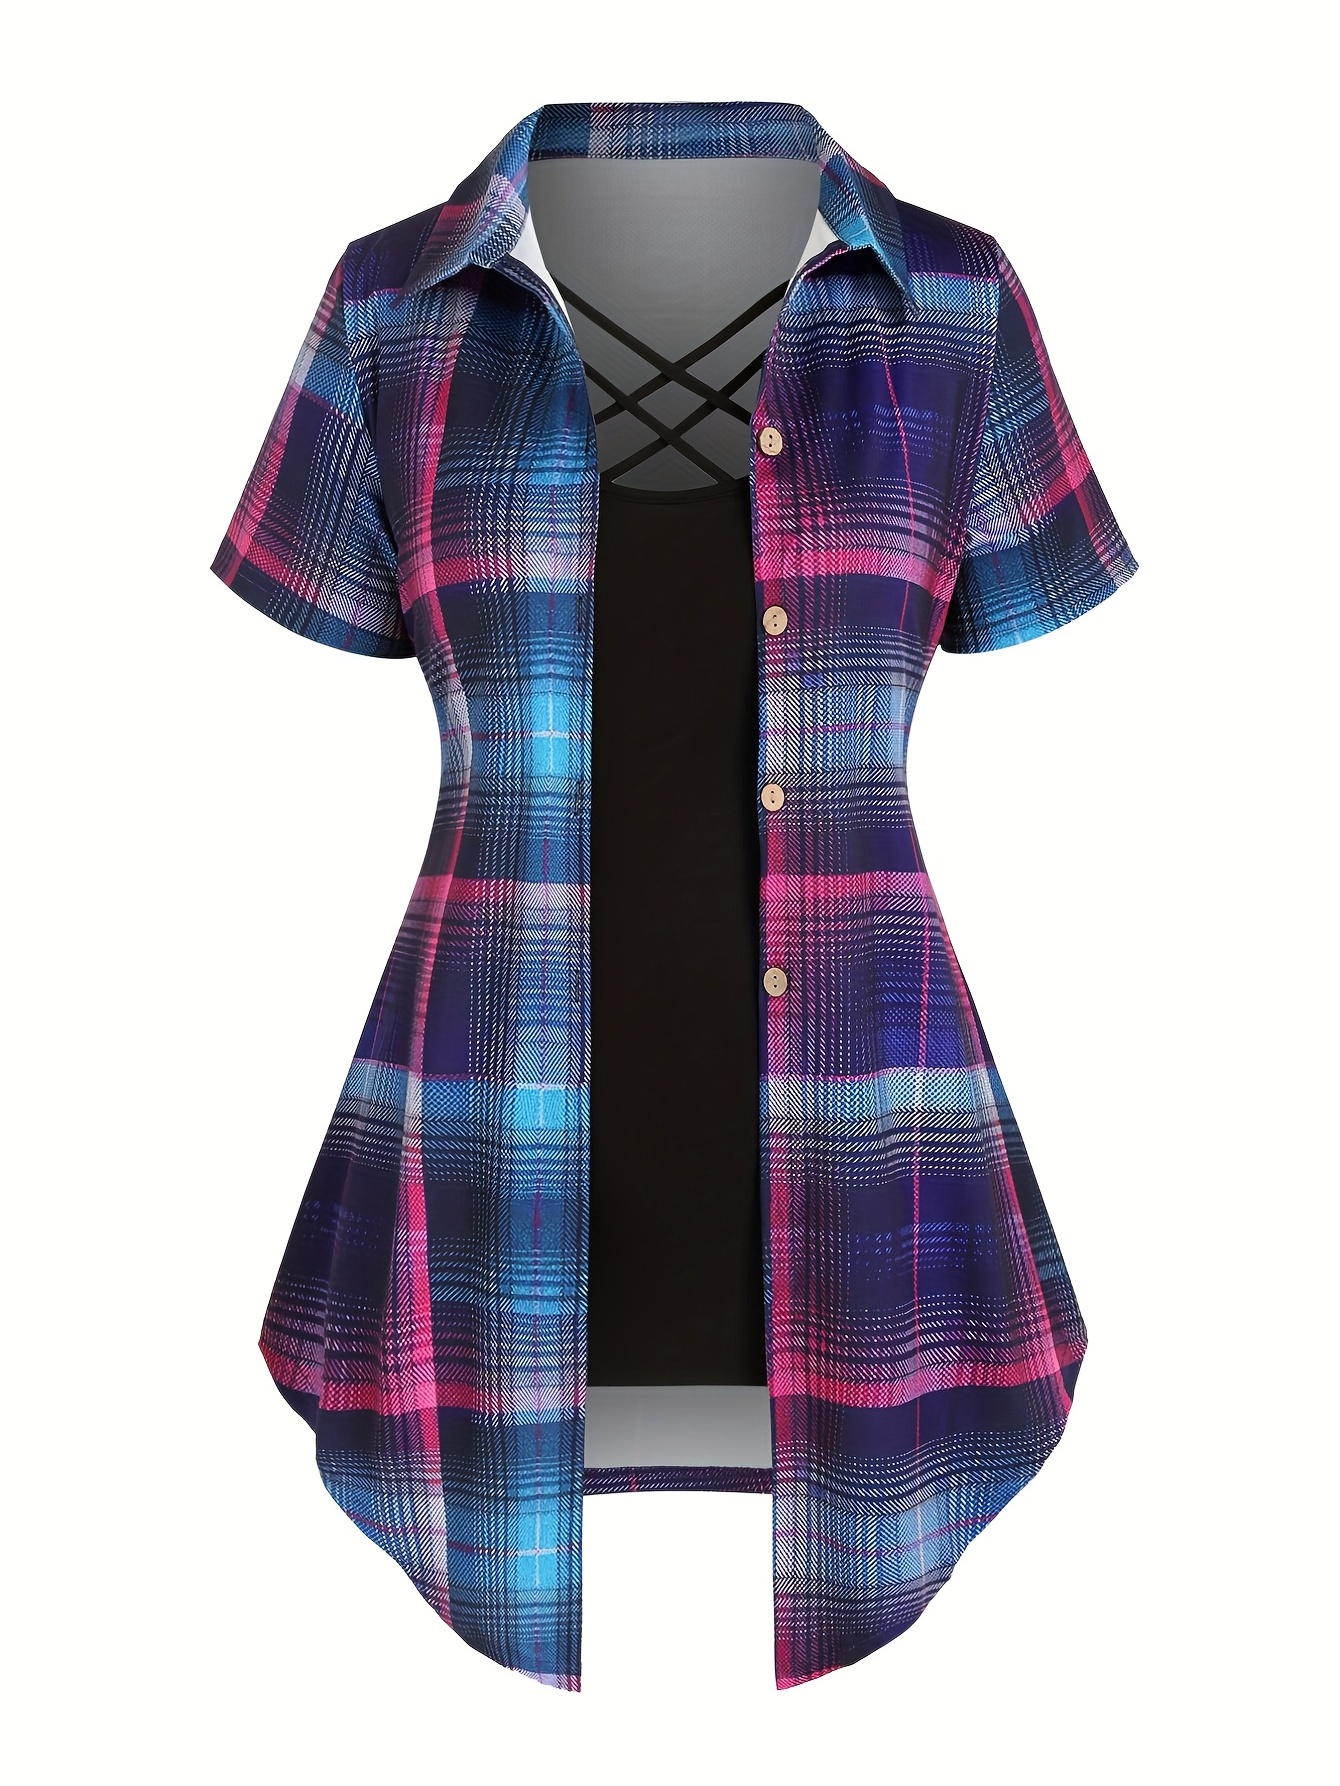 Casual Summer Two-piece Set, Plaid Print Button Front Shirt